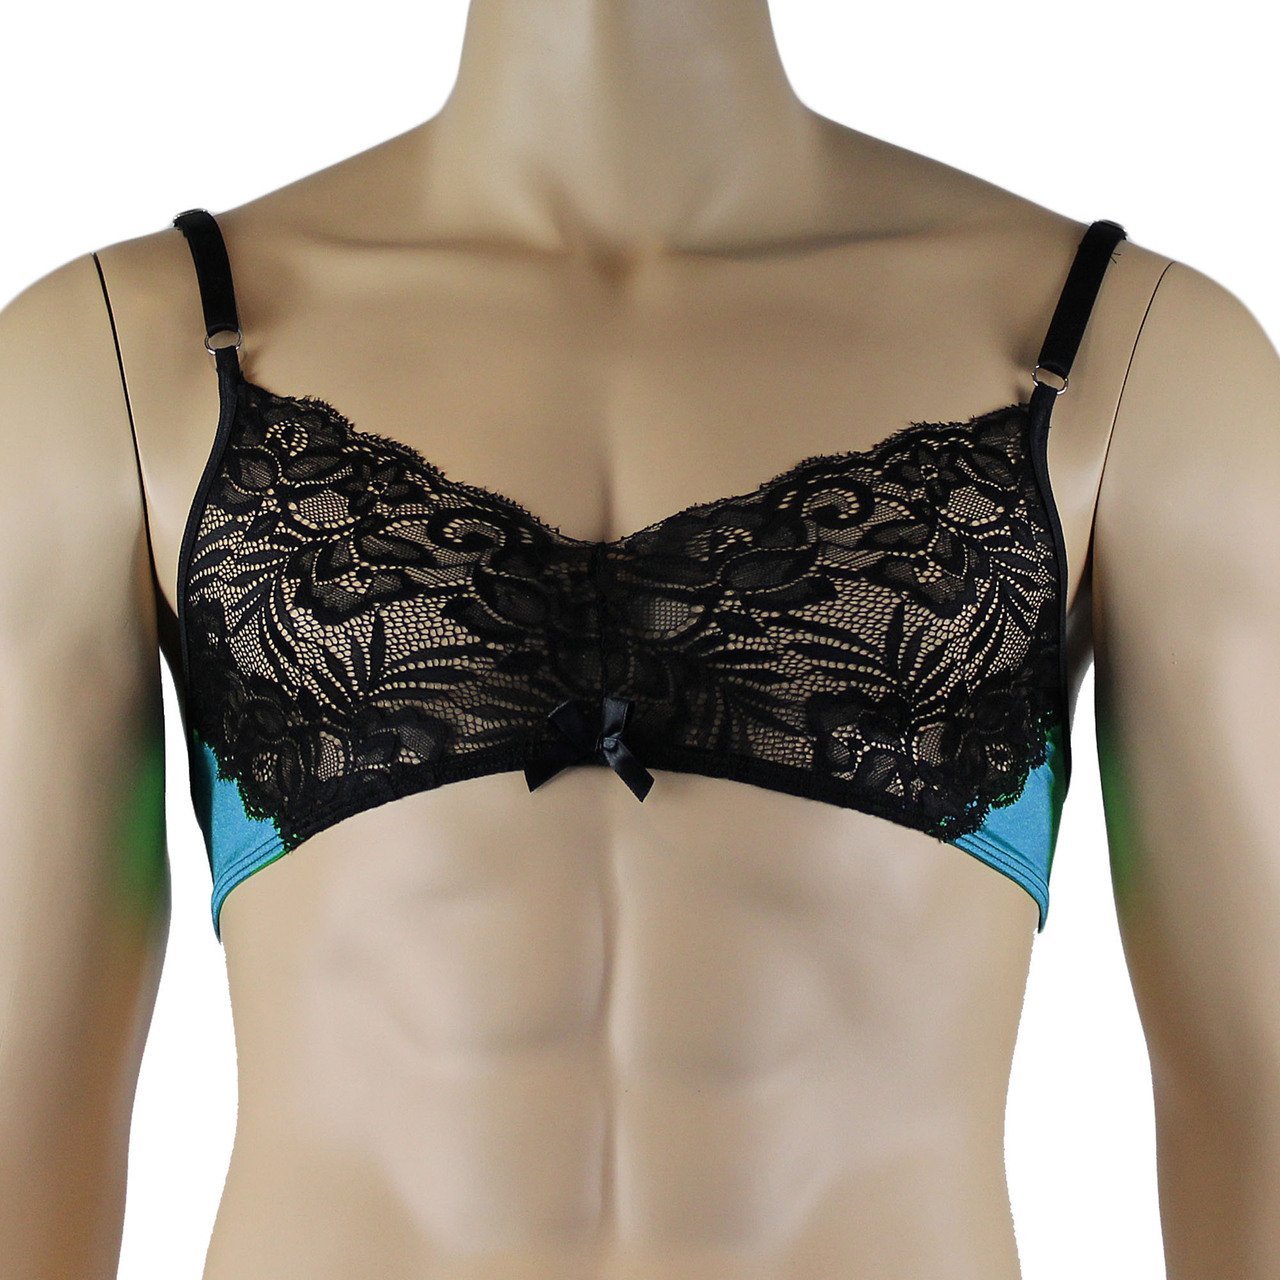 Mens Risque Bra Top, G string and Garterbelt (green and black plus other colours)